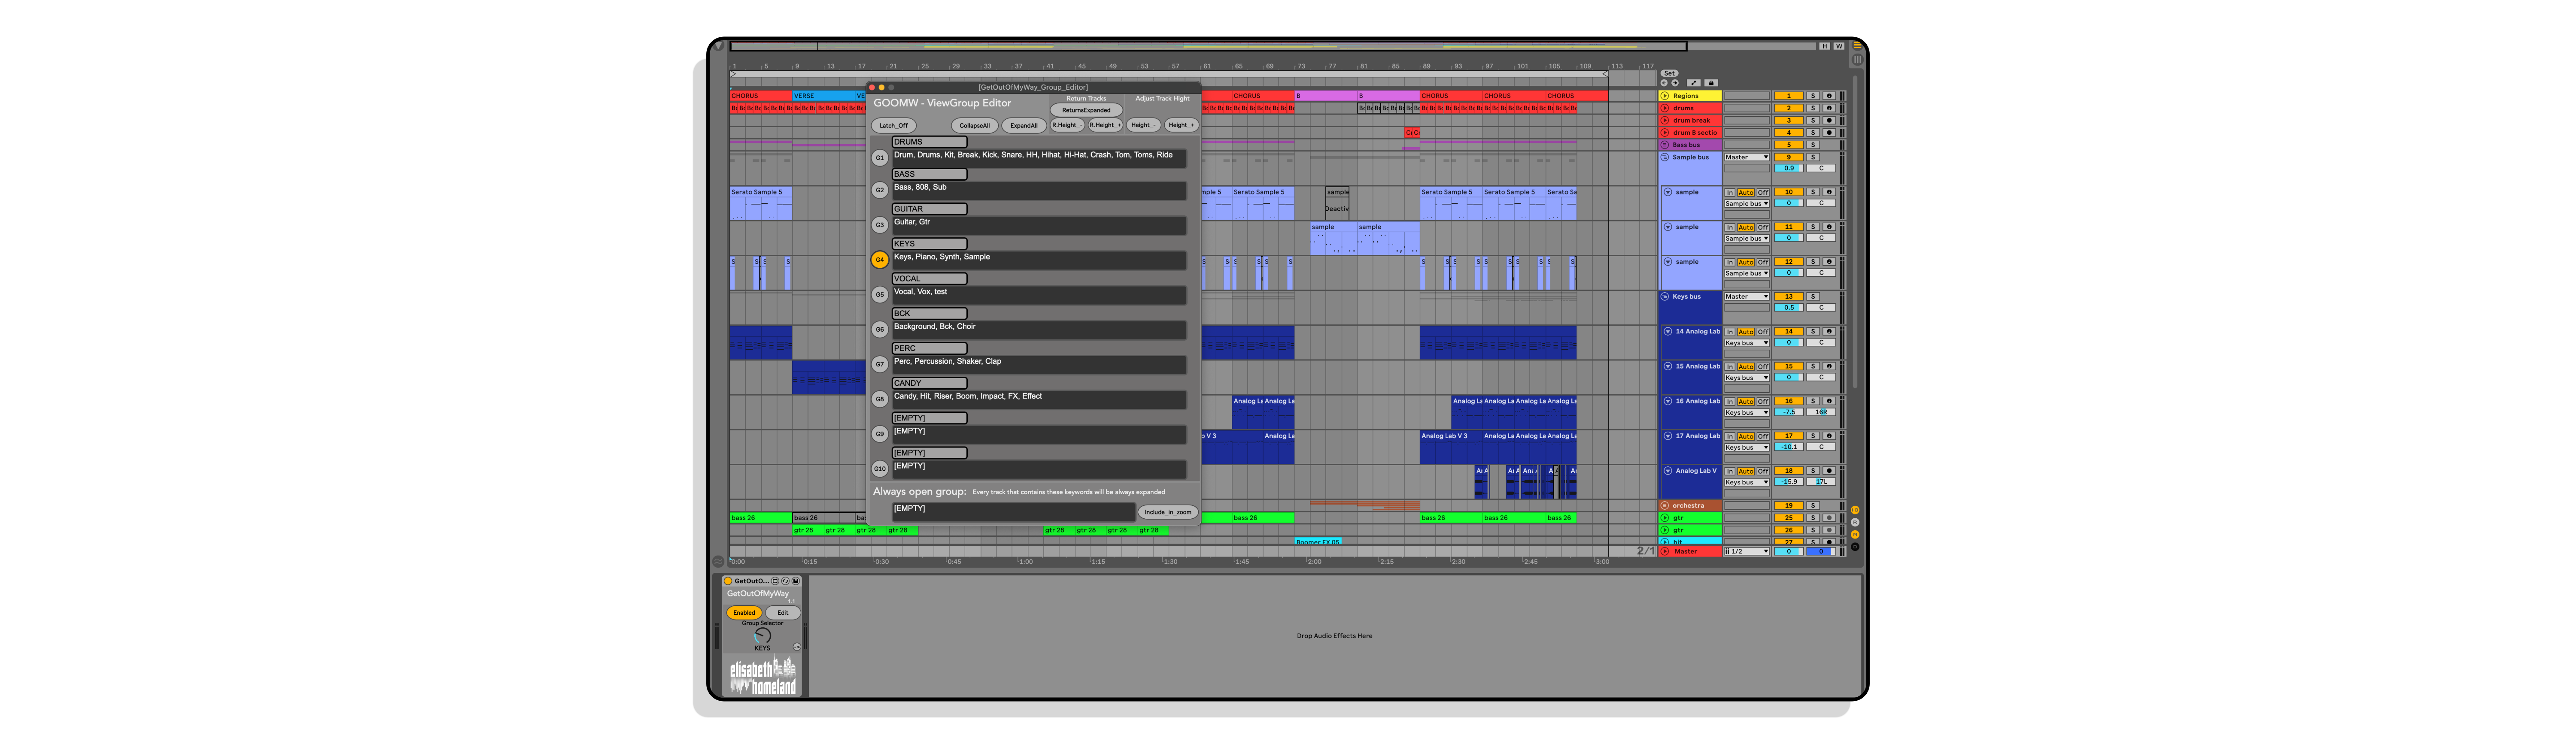 Get Out of my Way MaxforLive Device for Ableton Live by Elisabeth Homeland